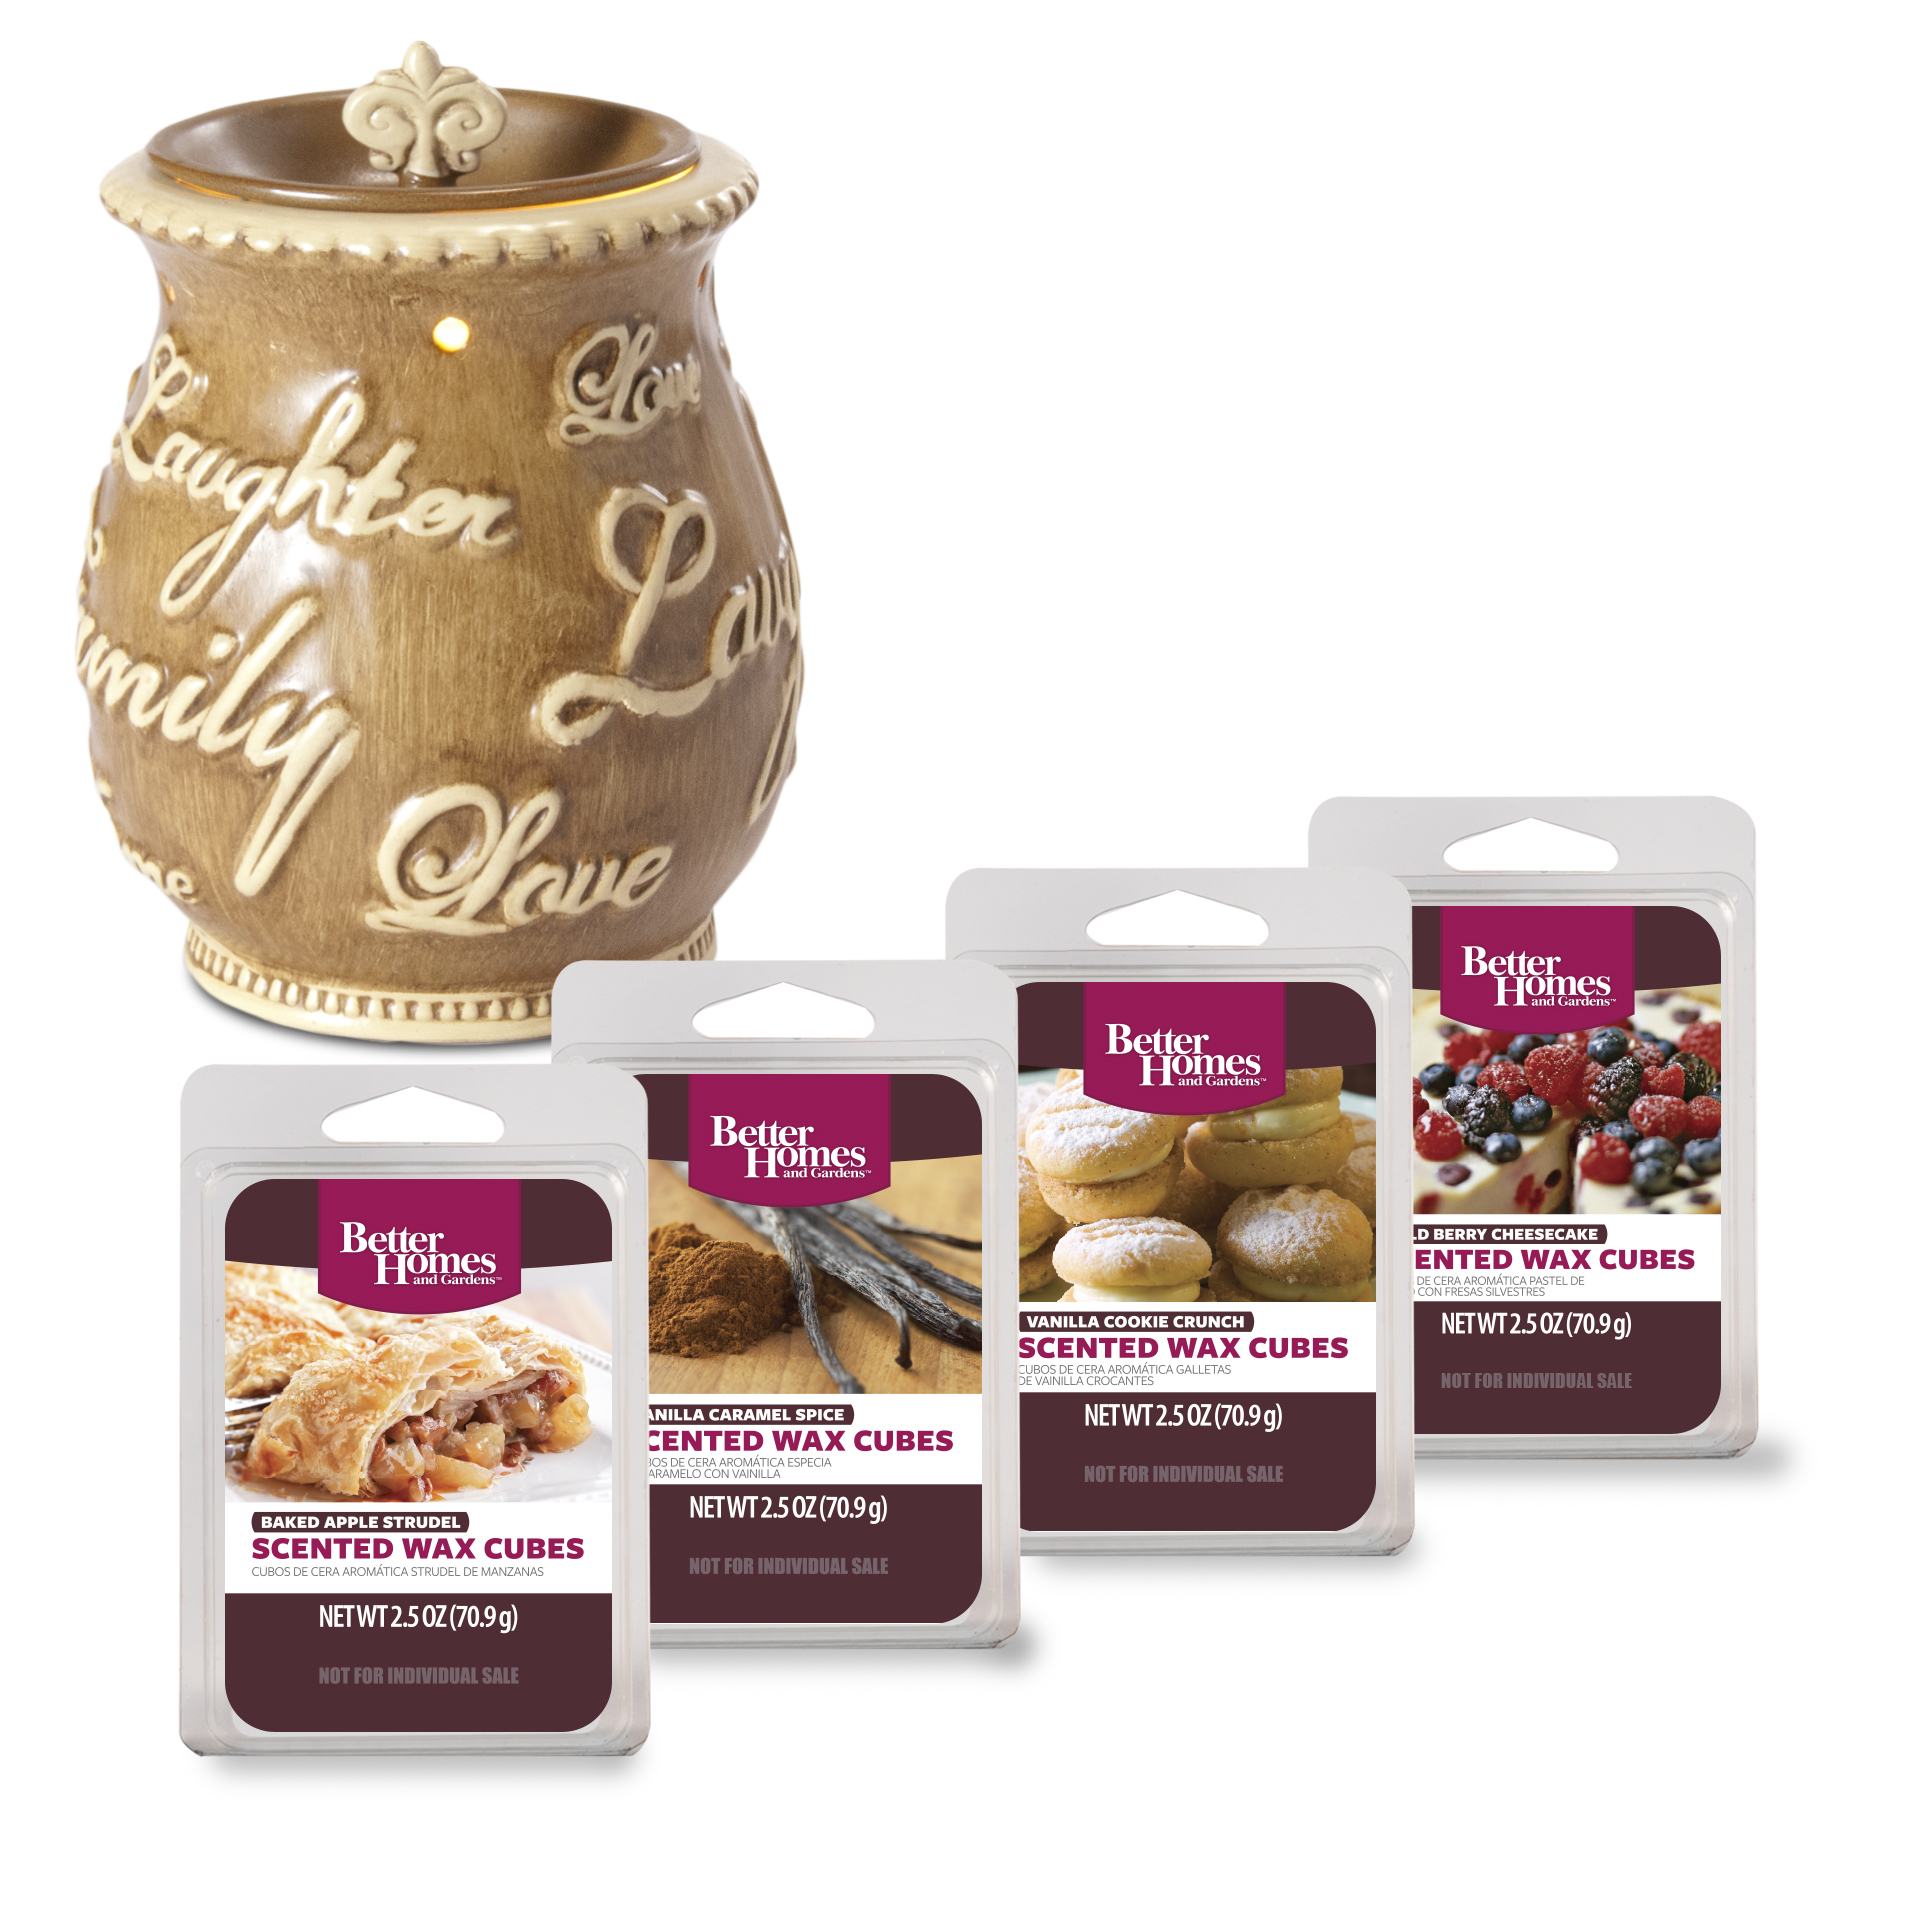 Better Homes & Gardens Expressions Full-Size Wax Warmer Starter Set - image 1 of 5